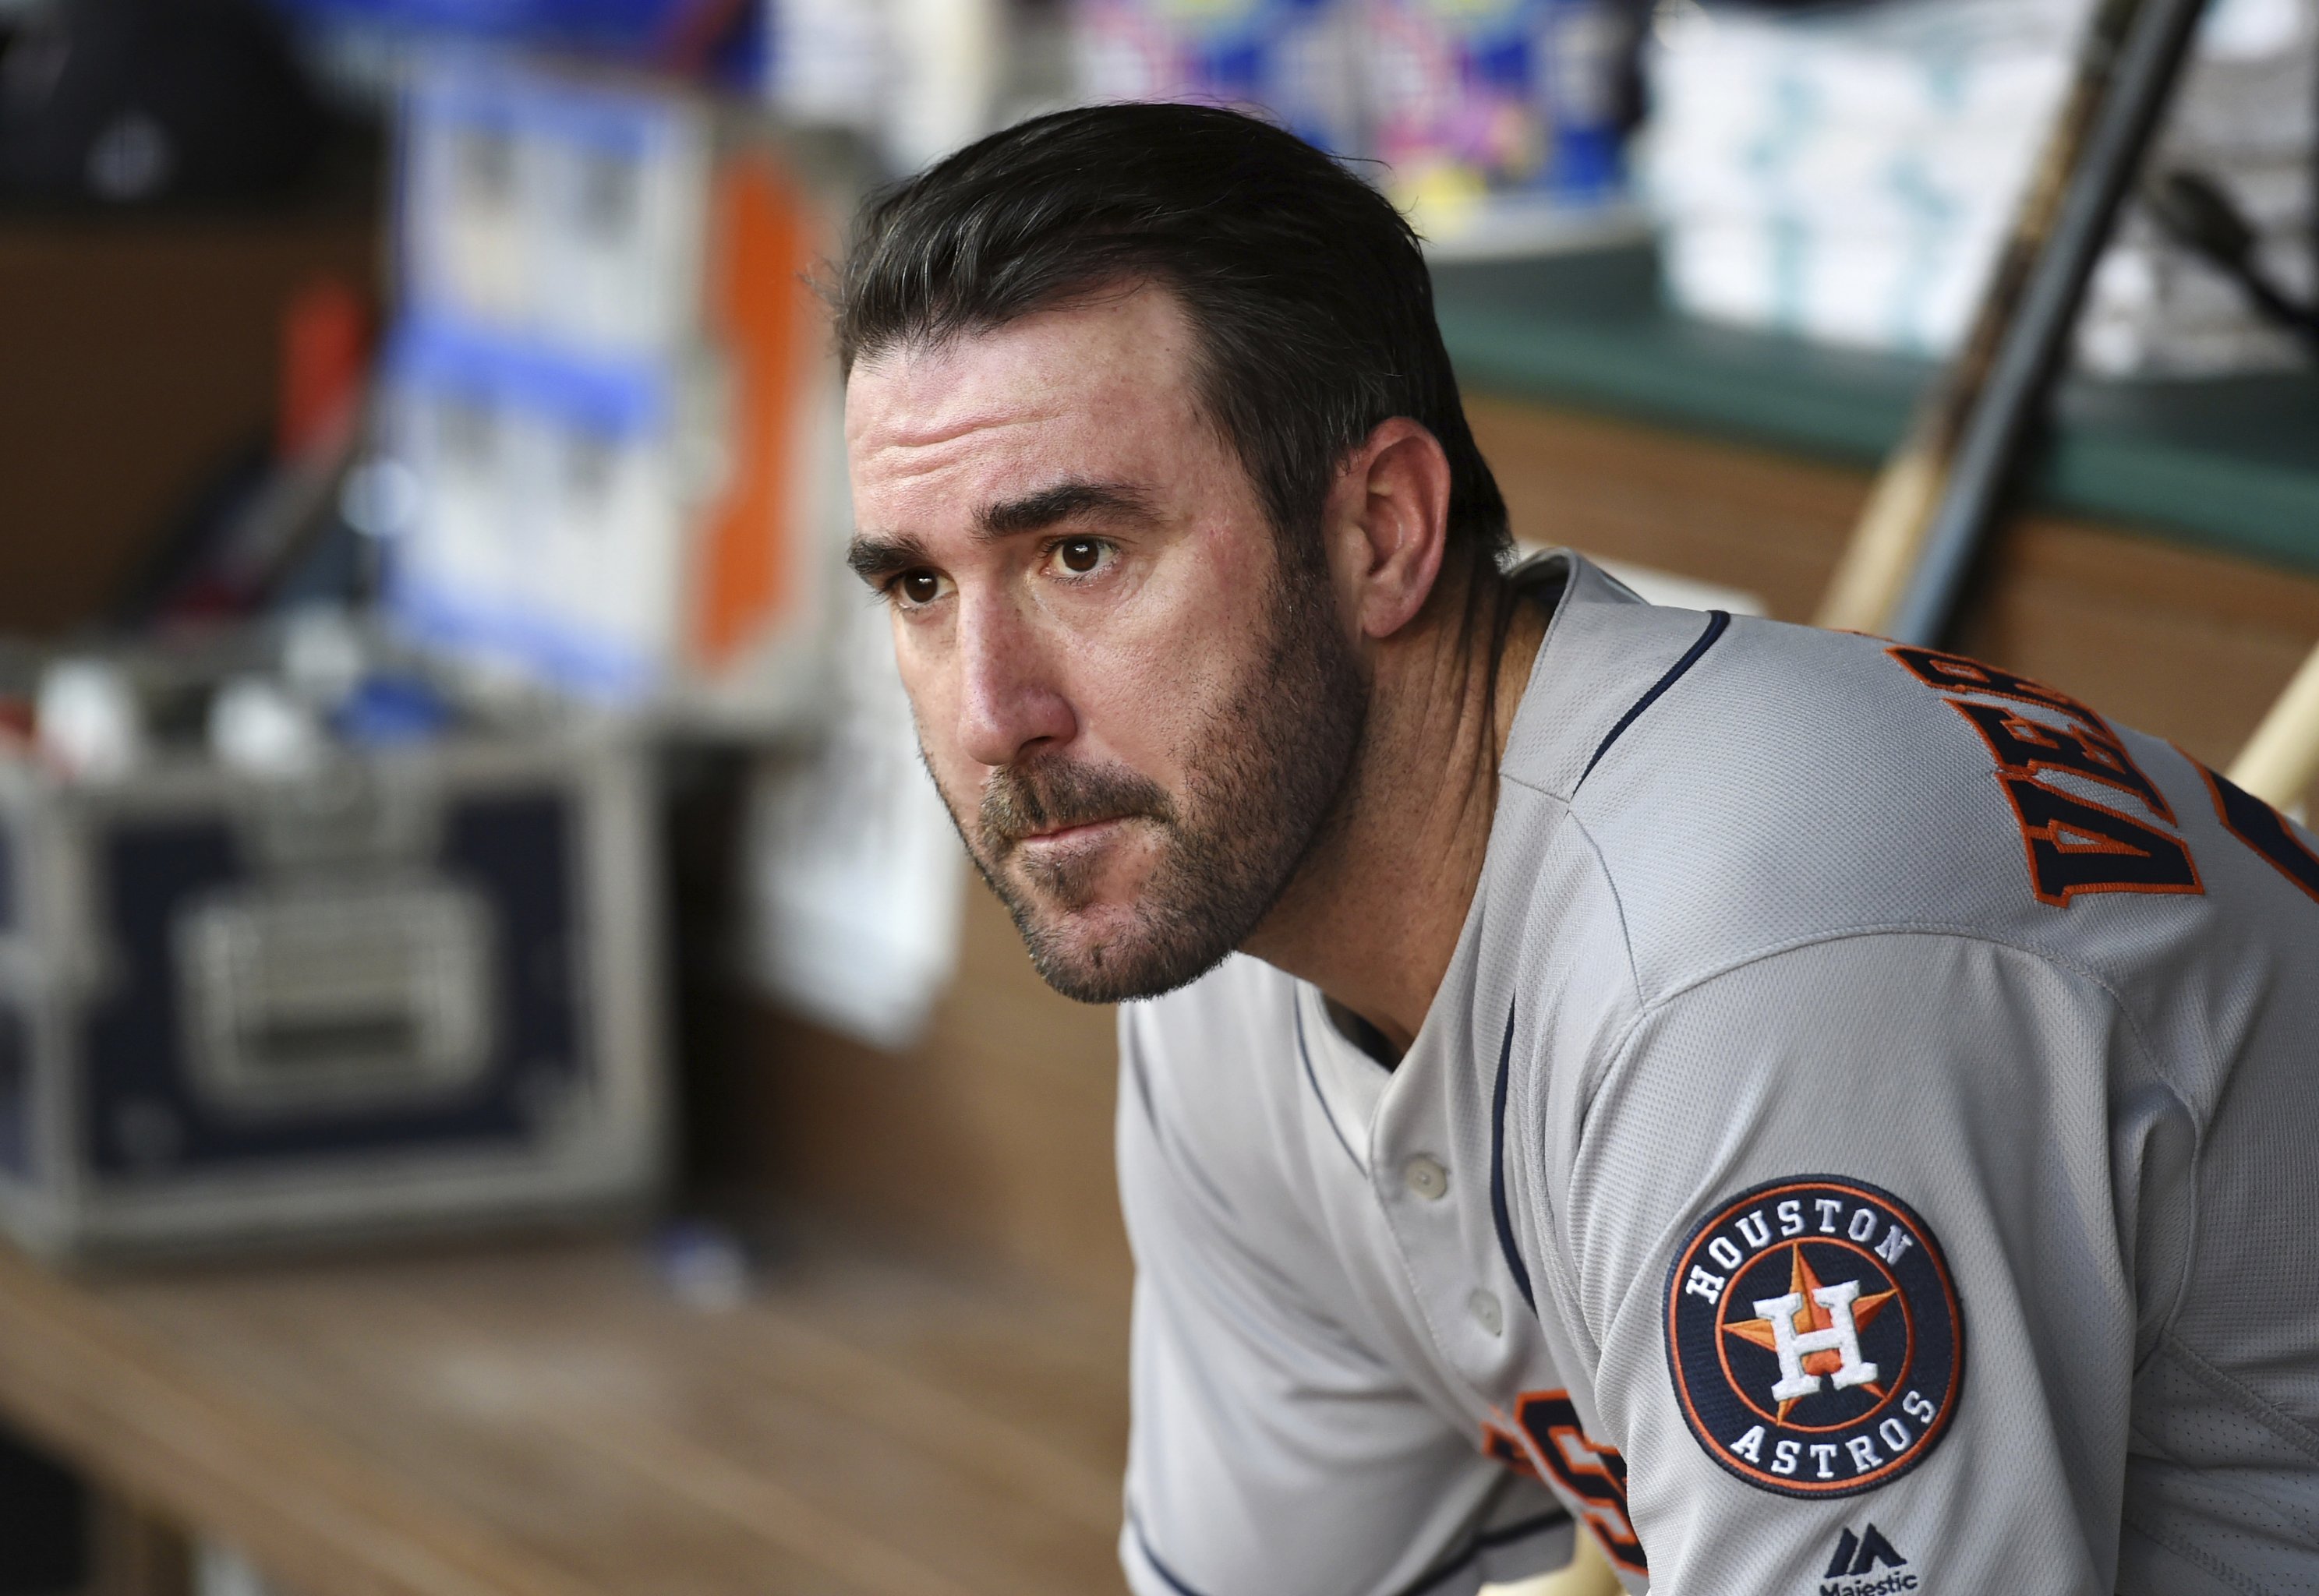 Justin Verlander Got Traded Back to the Astros and Everyone Made the Same  Uniform Joke - Sports Illustrated